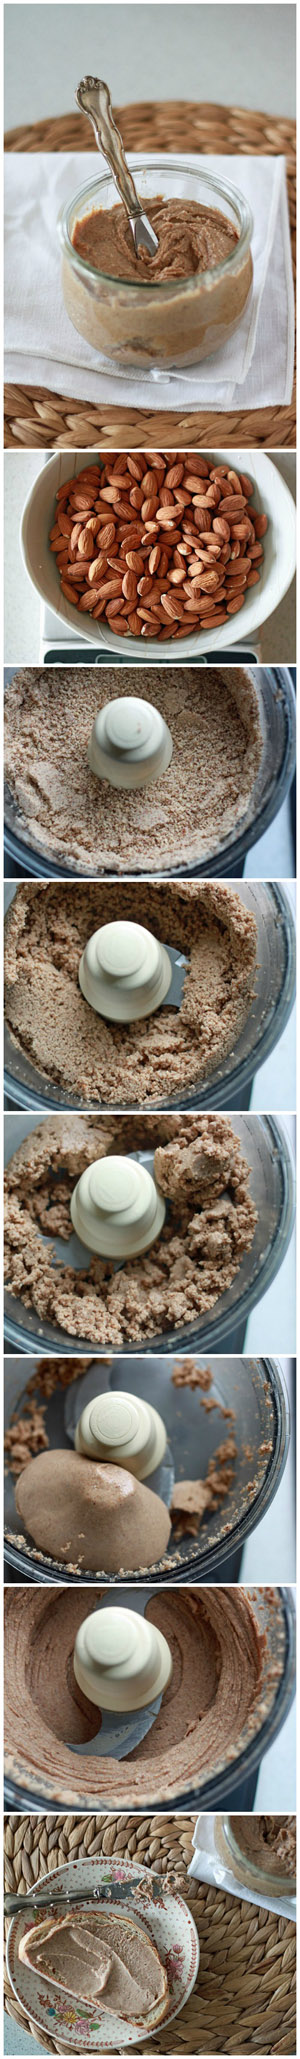 How To Make Almond Butter Kitchen Treaty Recipes